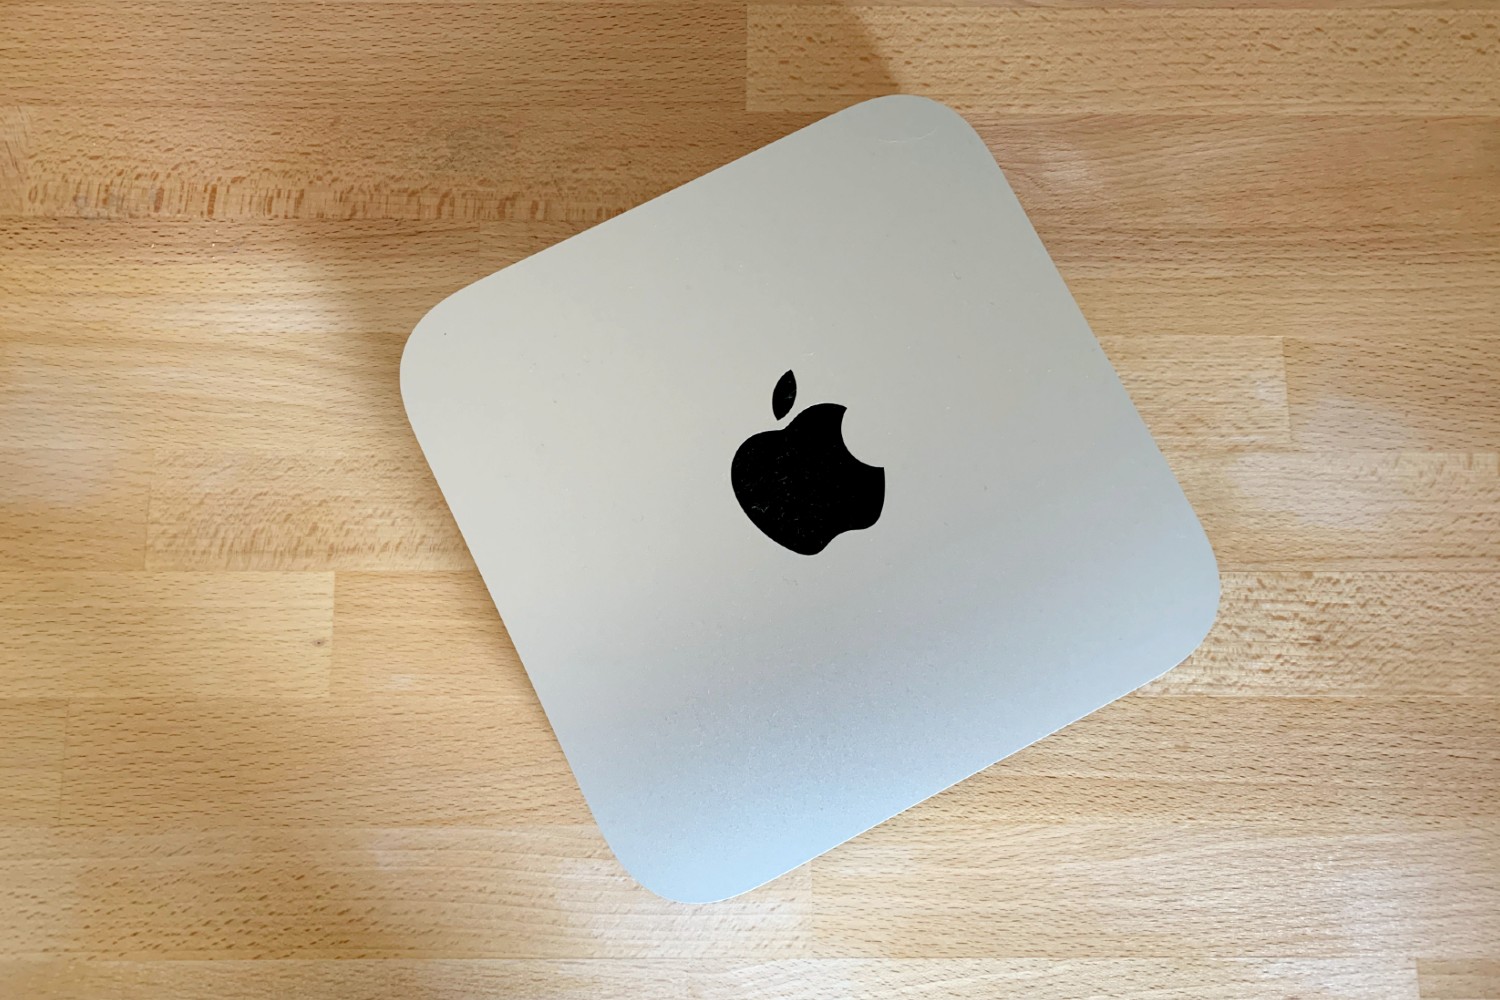 The 2020 Mac Mini, powered by Apple's M1 chip, on a wooden surface.